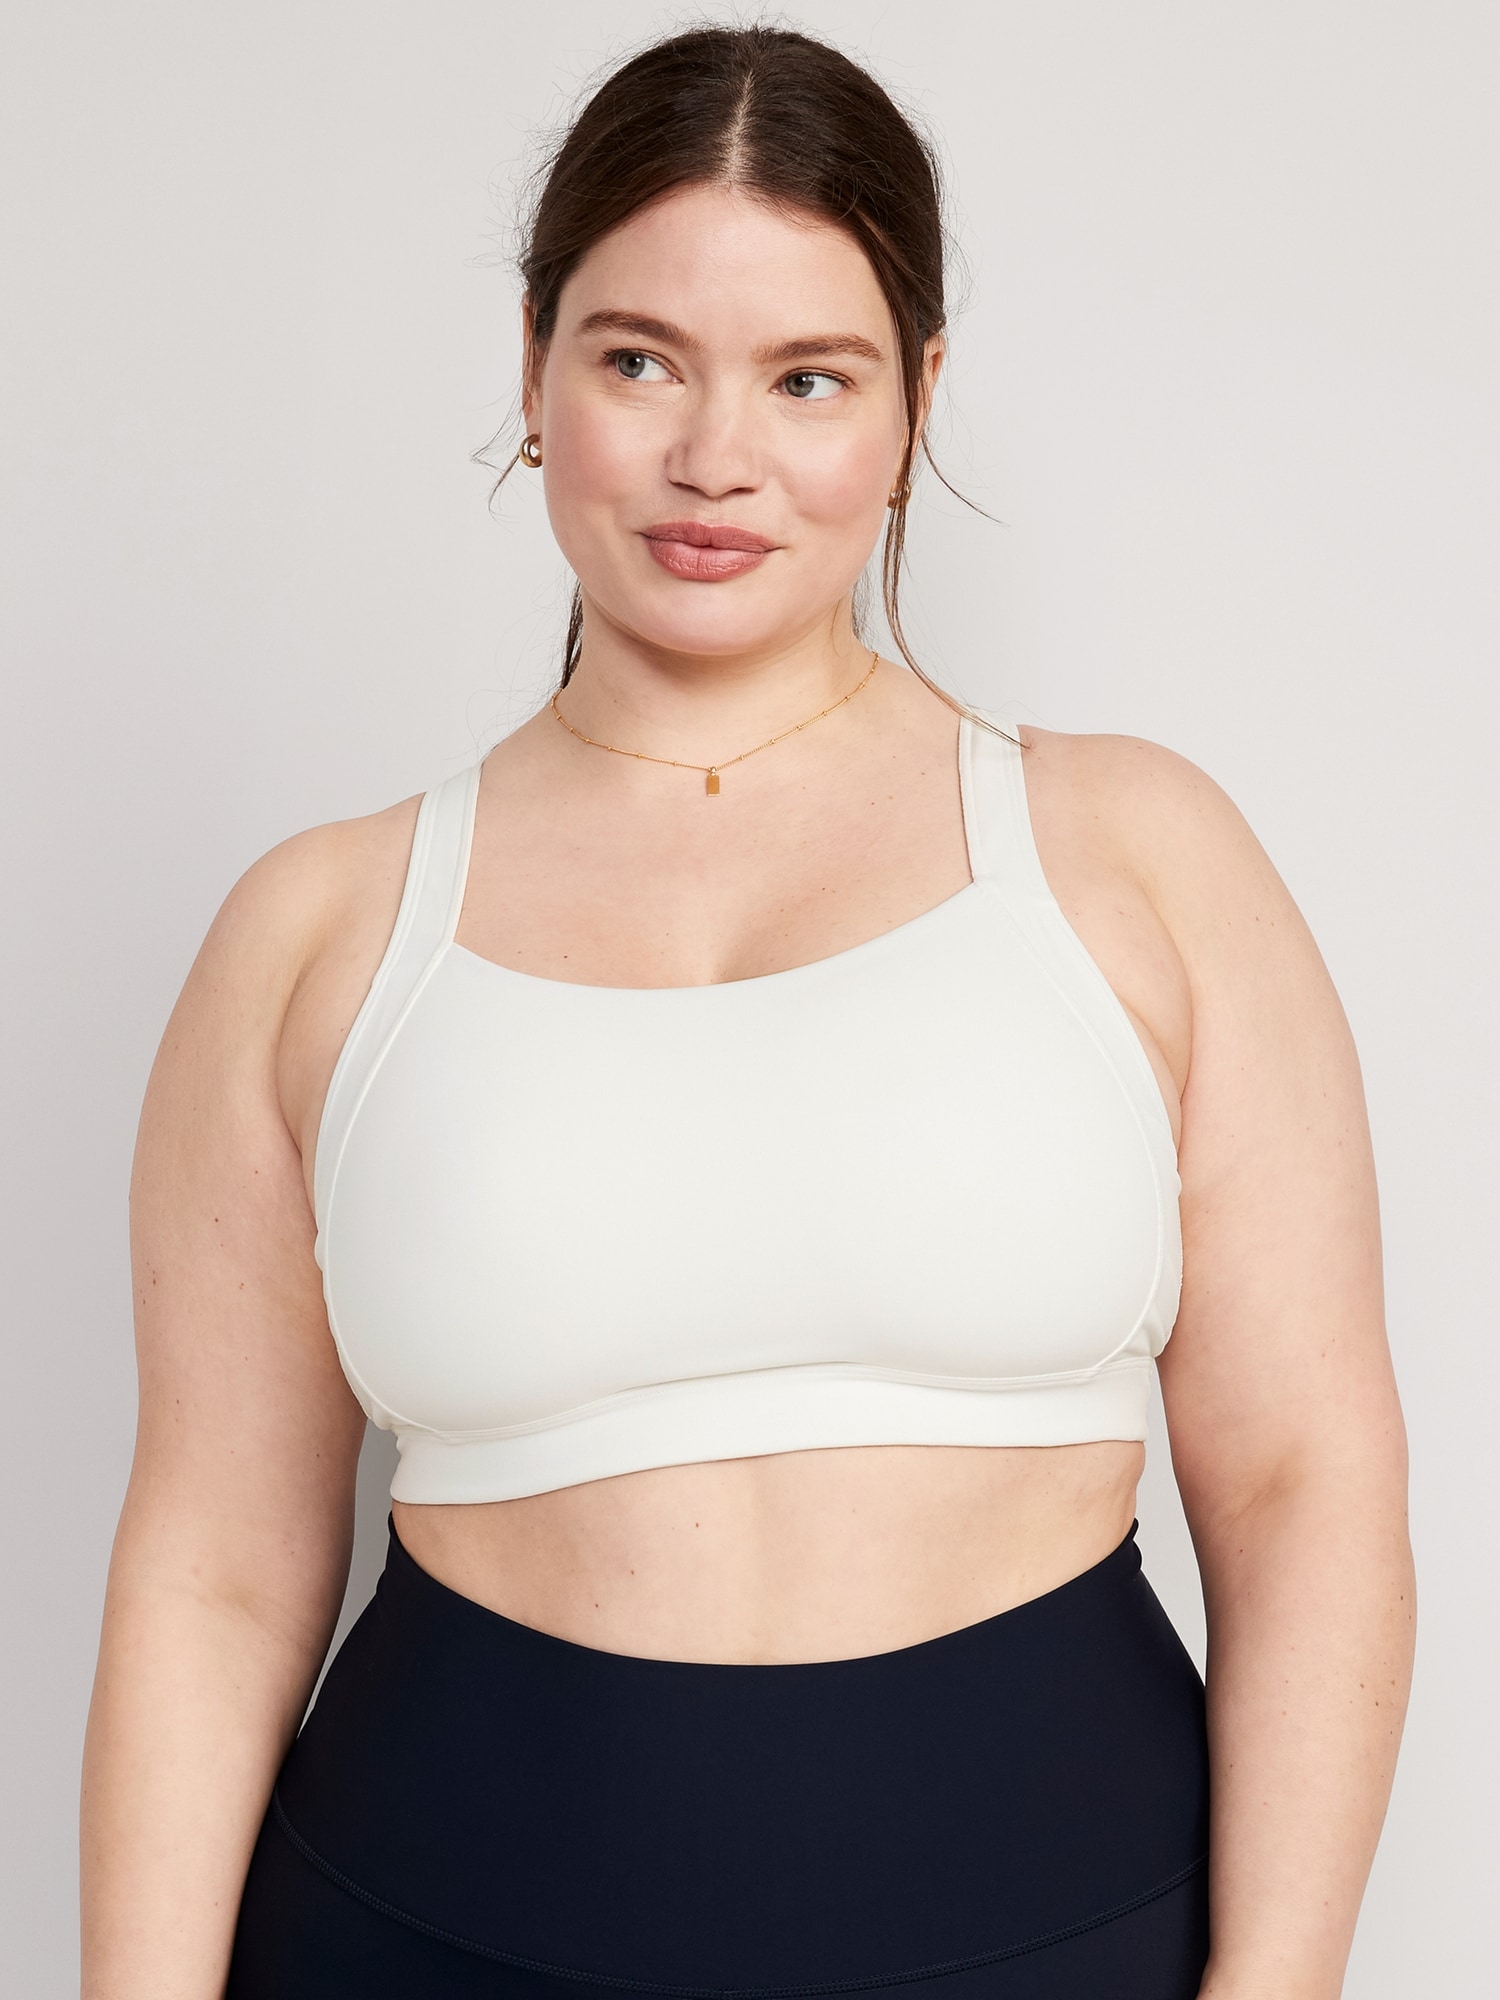 Medium Support Plus-Size Racerback Sports Bra by Old Navy - Proud Mary